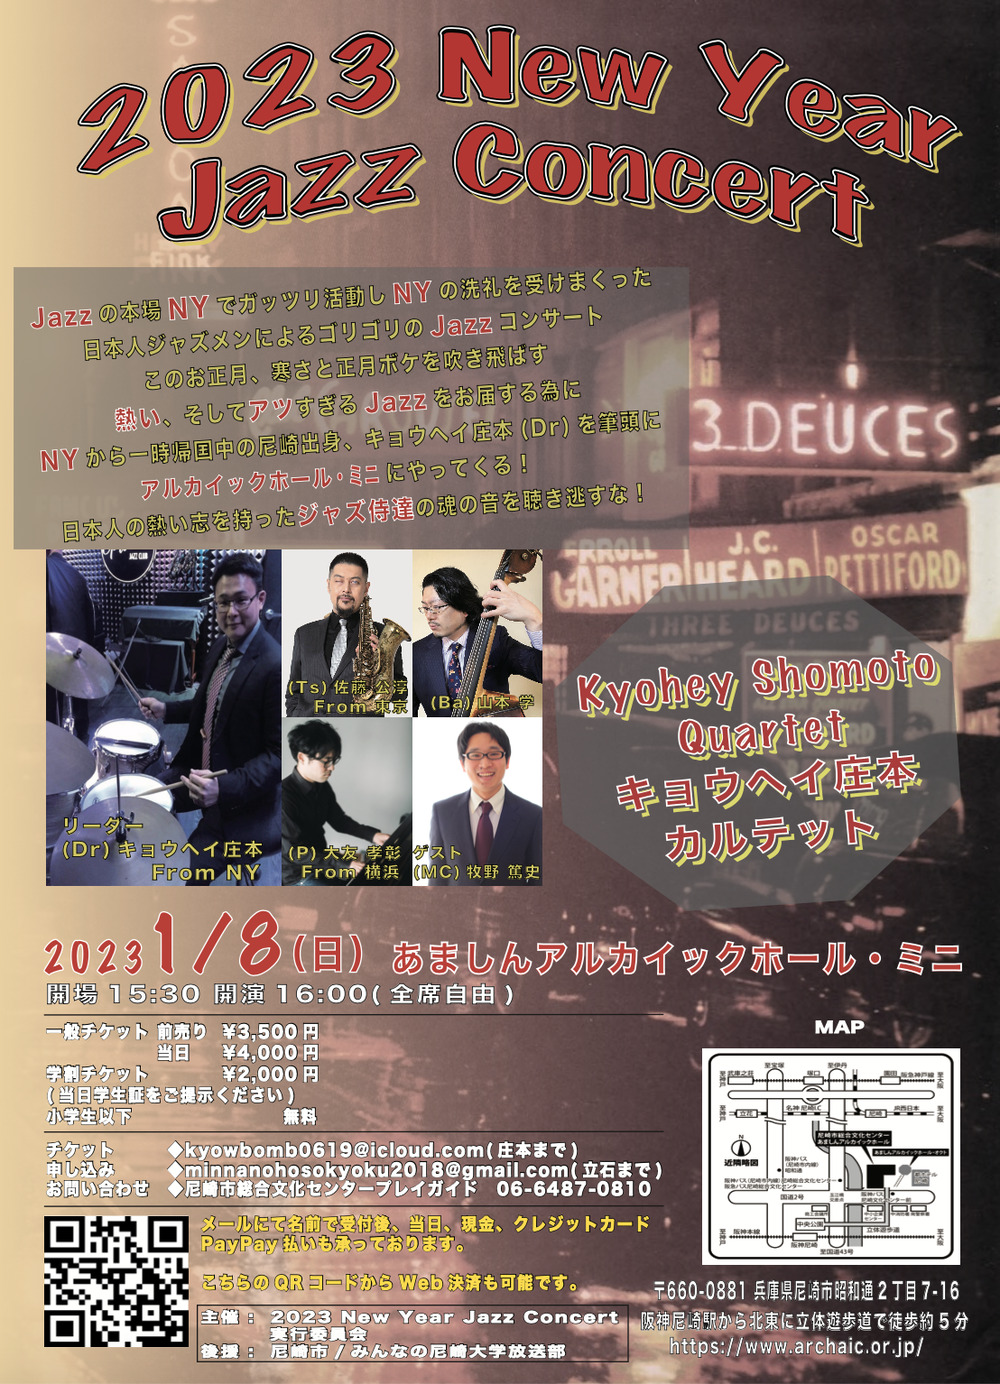 2023 New Year Jazz Concert〜Presented by Kyohey Shomoto